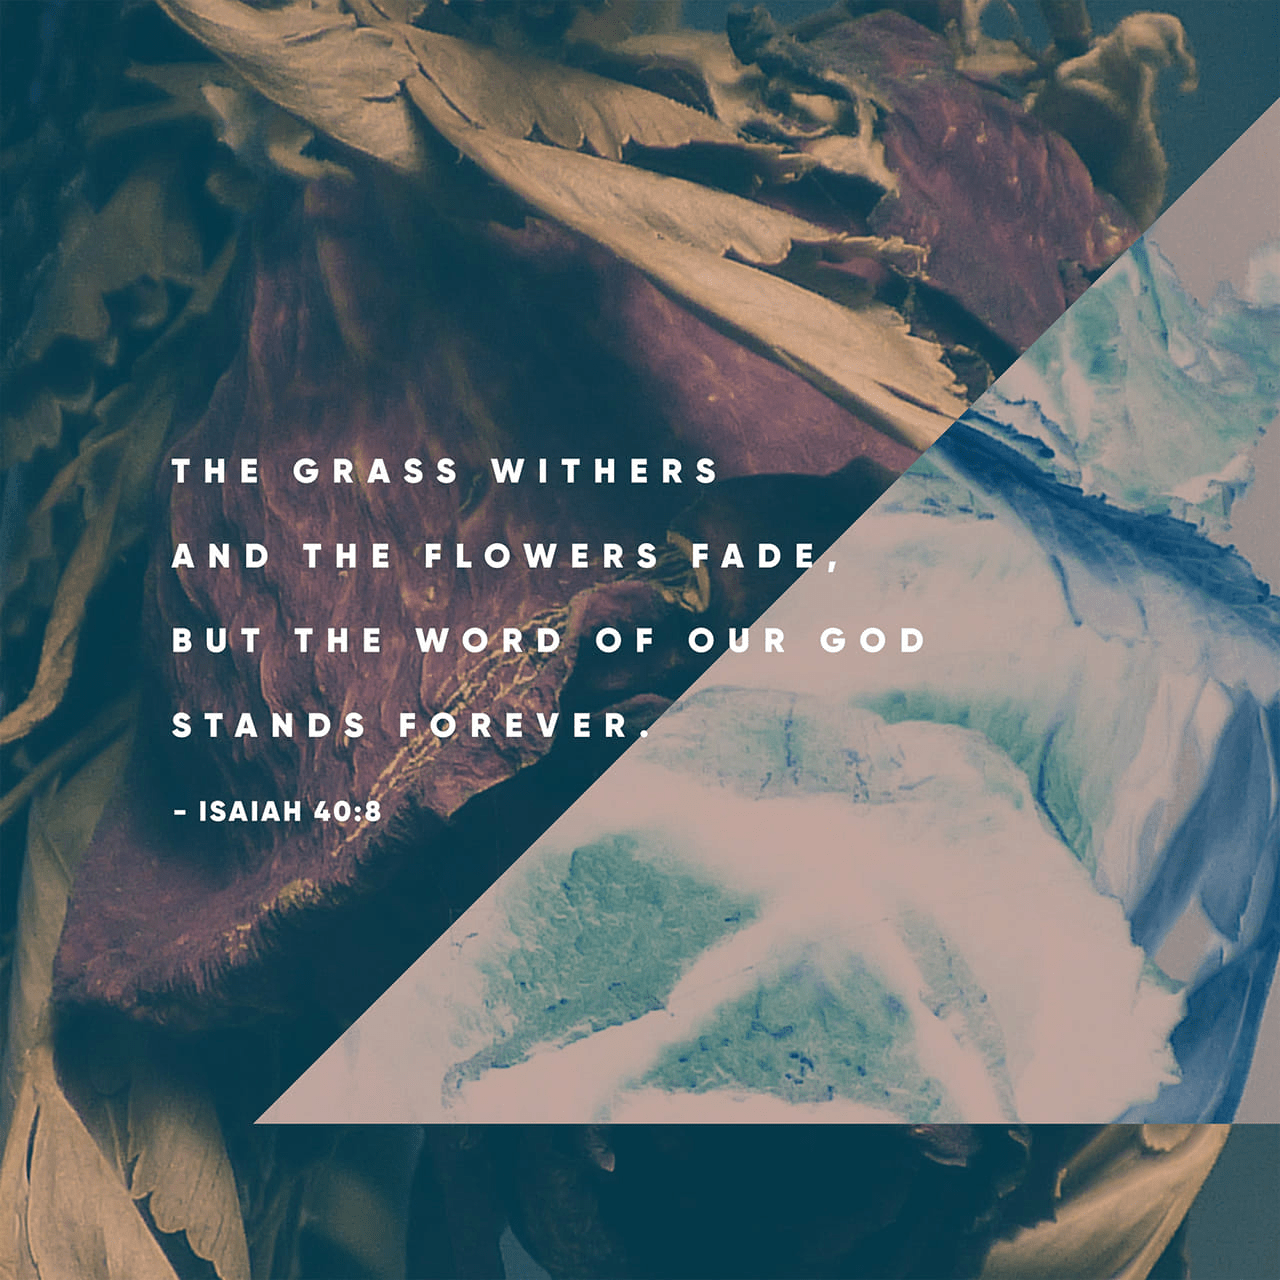 VOTD November 28 - “The grass withers, the flower fades, But the word of our God stands forever.” Isaiah 40:8 NASB